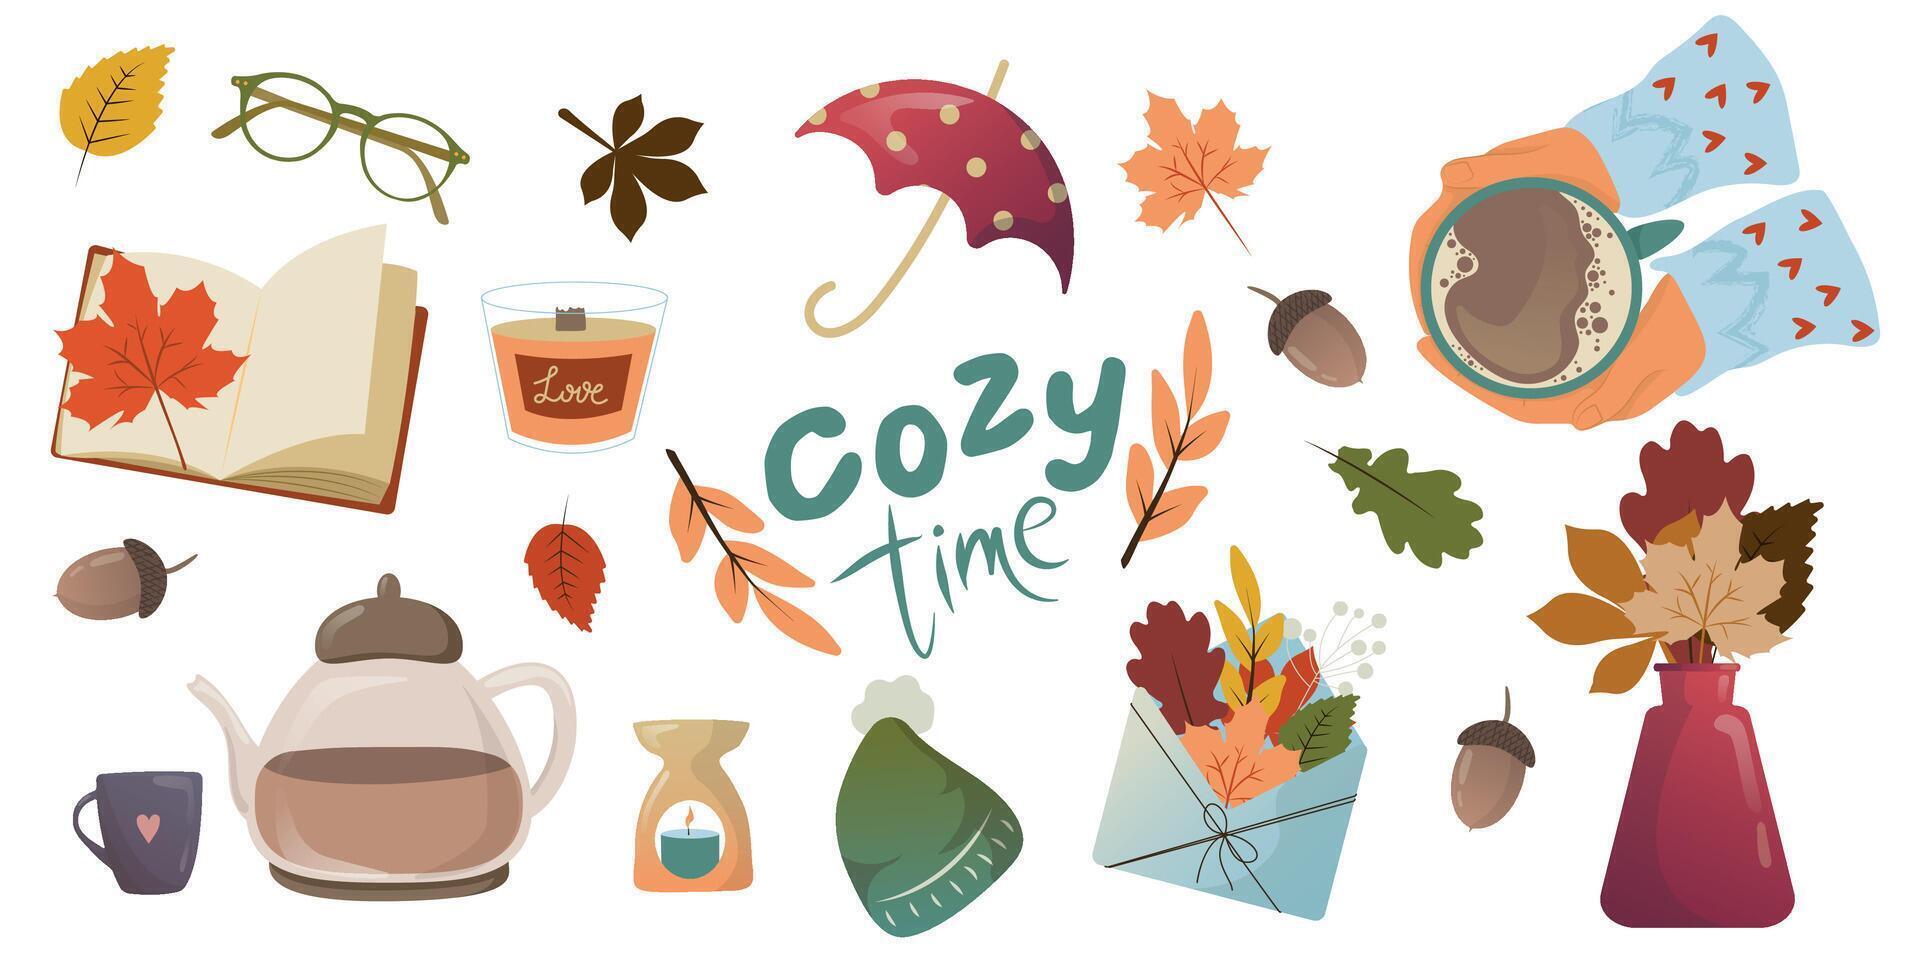 set of autumn icons cup of coffee, falling leaves, cozy time, candles, book and teapot. Scrapbook collection of fall season elements. Bright elements for harvest time. Autumn collection vector